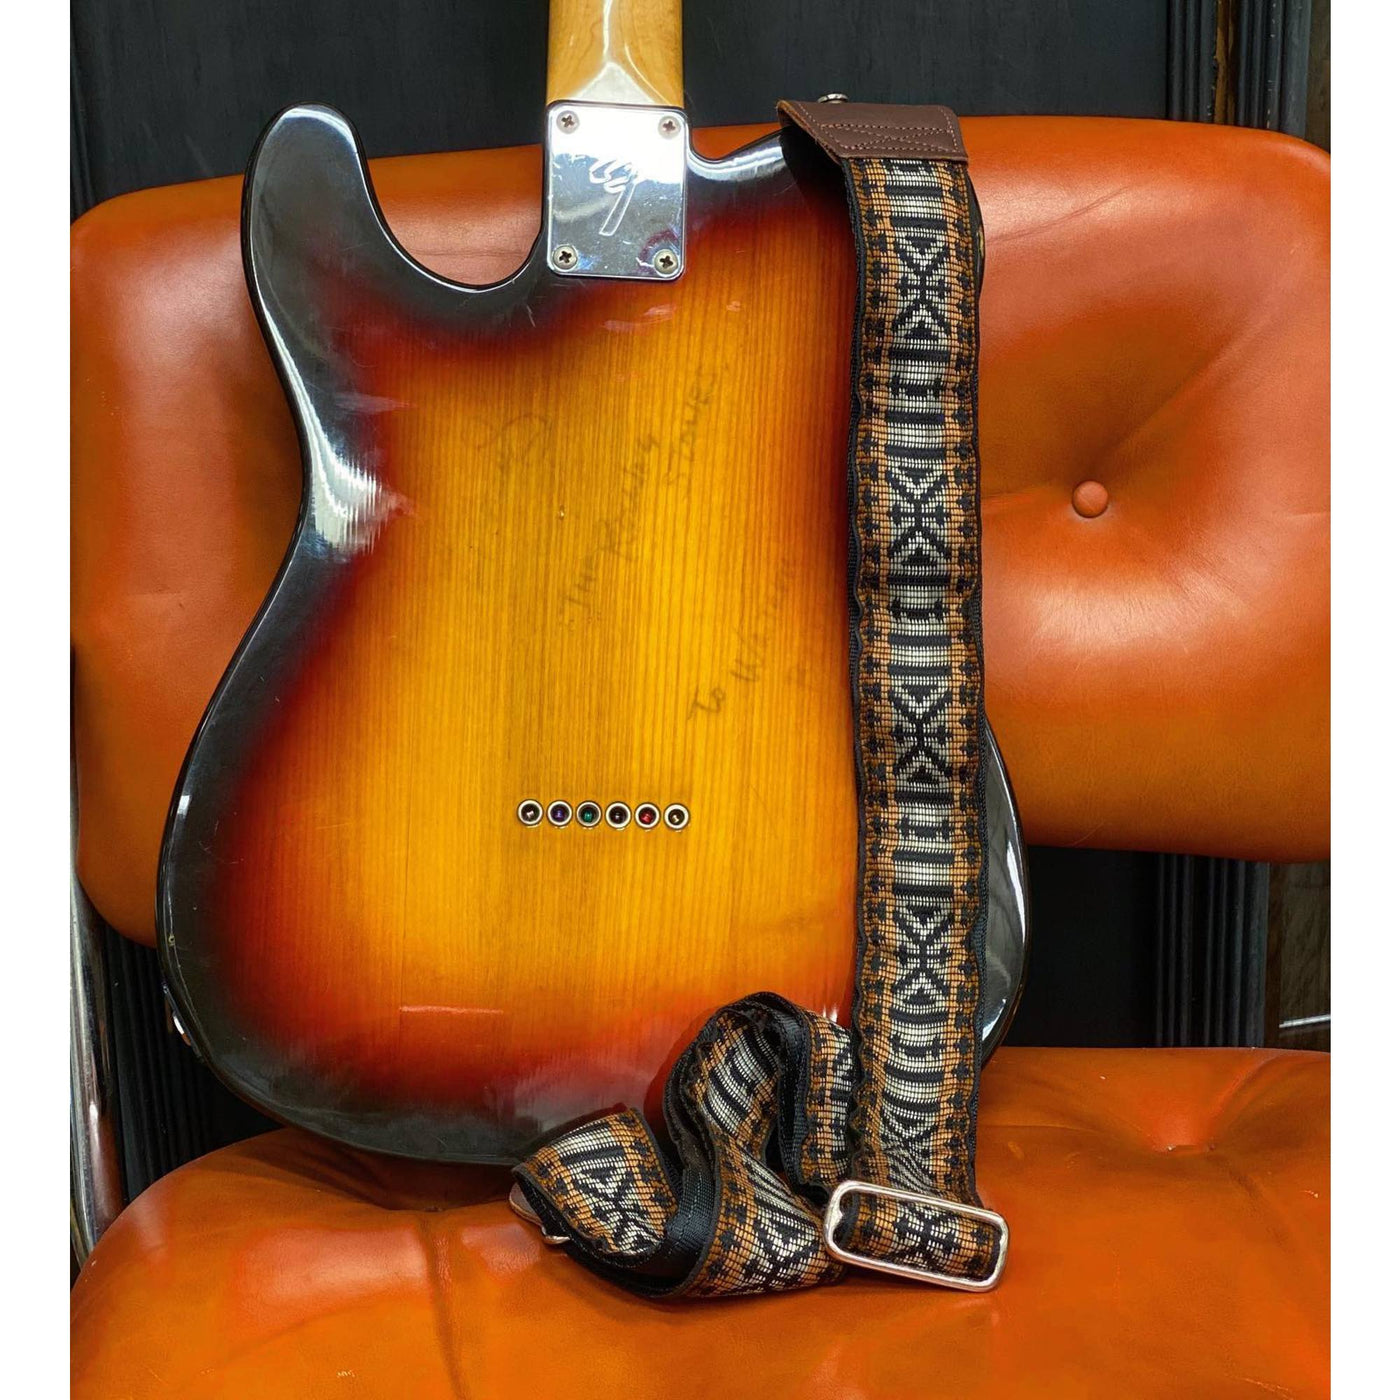 Souldier GS0886BK02WB - Handmade Seatbelt Guitar Strap for Bass, Electric or Acoustic Guitar, 2 Inches Wide and Adjustable Length from 30" to 63"  Made in the USA, Zapata